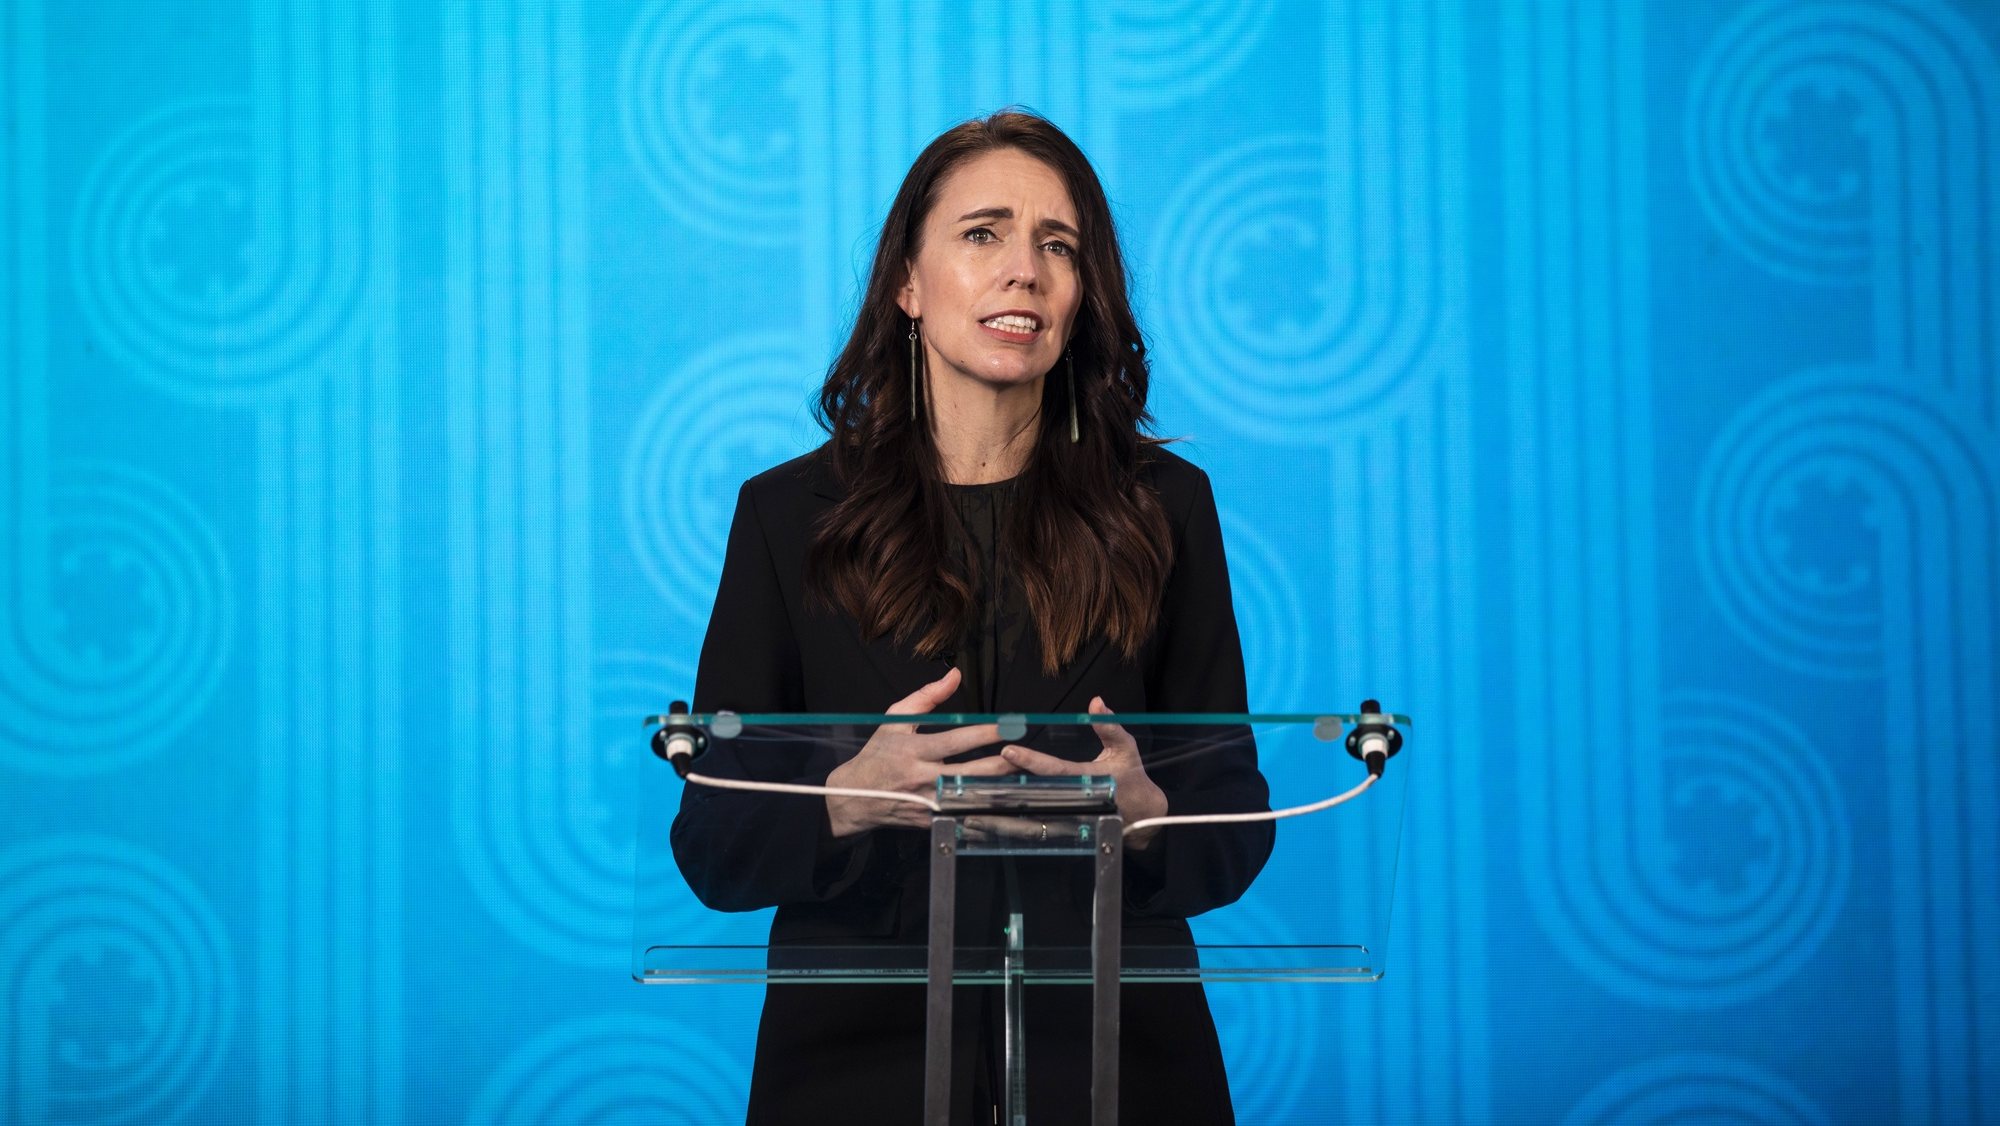 epa09575183 A handout photo made available by APEC New Zealand, the host of the Asia-Pacific Economic Cooperation (APEC) forum 2021, shows New Zealand Prime Minister Jacinda Ardern opening the APEC CEO Summit 2021 in Wellington, New Zealand, 11 November, 2021. The APEC CEO Summit, the premier conference for Asia-Pacific’s business and government leaders, is held alongside the APEC’s Leaders’ Week meetings on 11-12 November.  EPA/Jeff Tollan / APEC New Zealand / HANDOUT  HANDOUT EDITORIAL USE ONLY/NO SALES